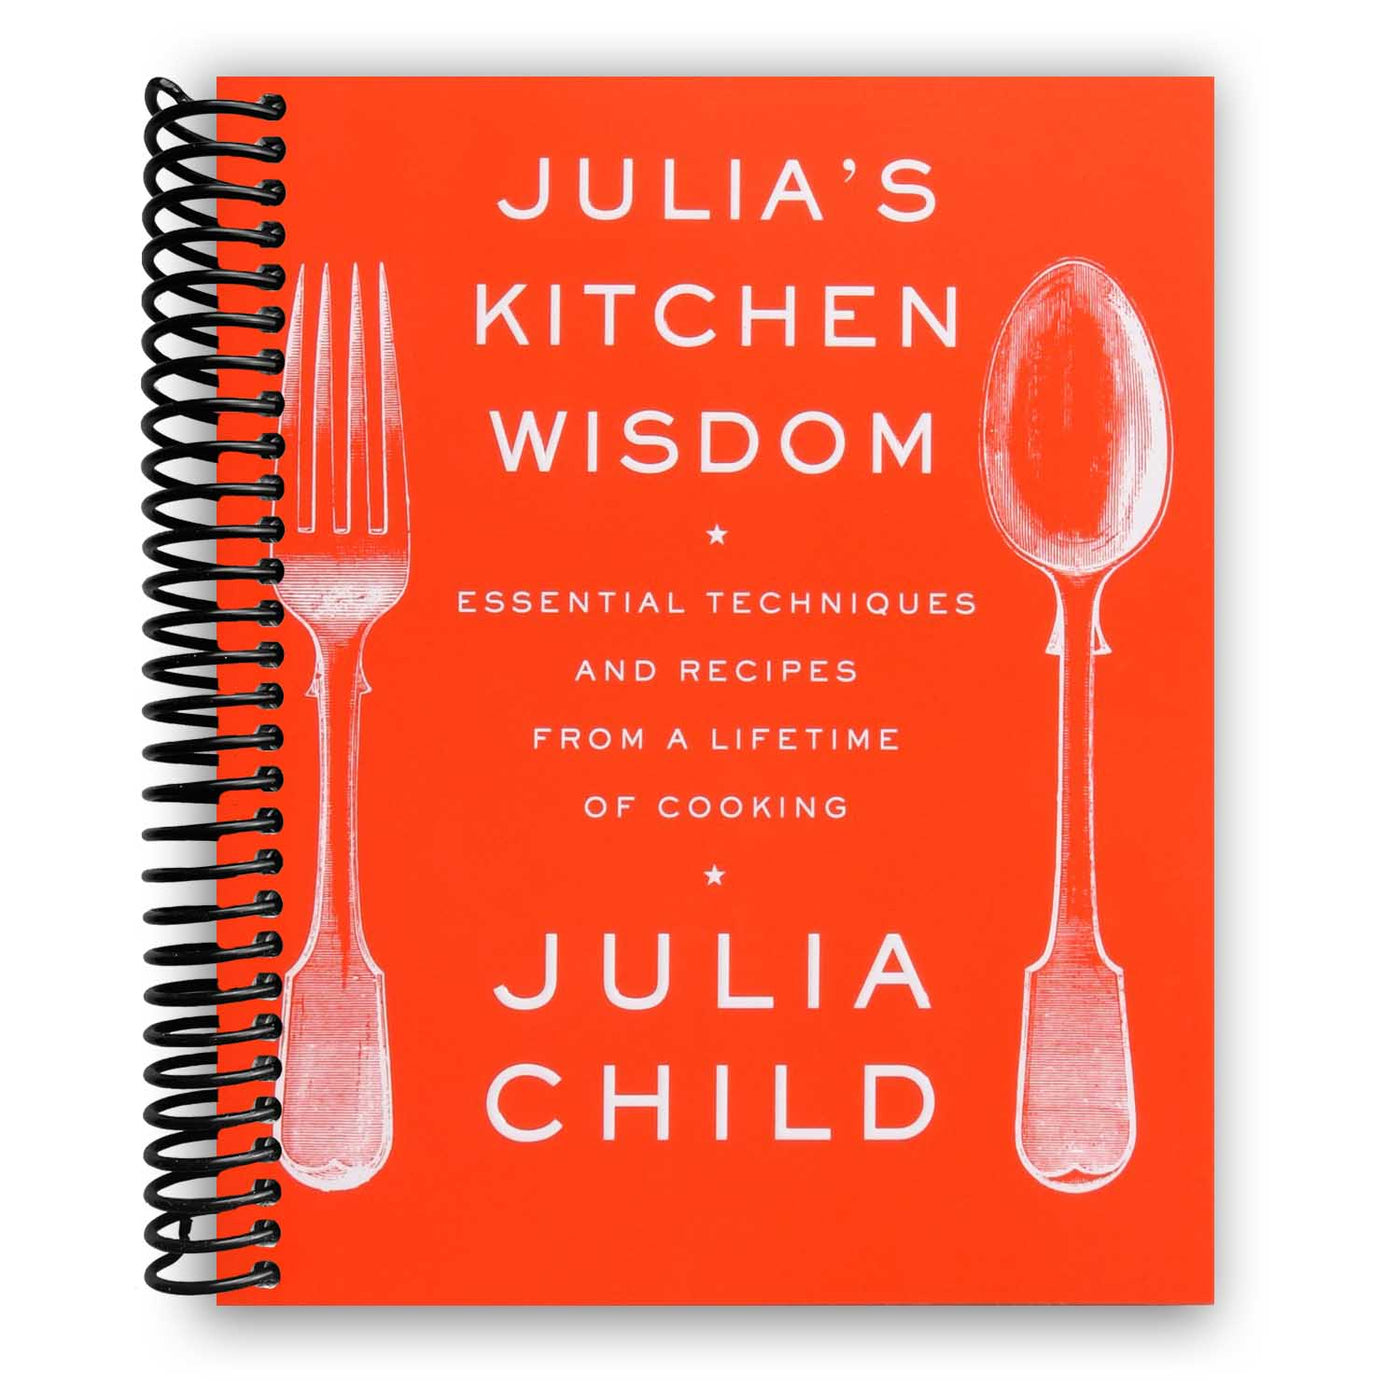 Julia's Kitchen Wisdom: Essential Techniques and Recipes from a Lifetime of Cooking: A Cookbook (Spiral Bound)